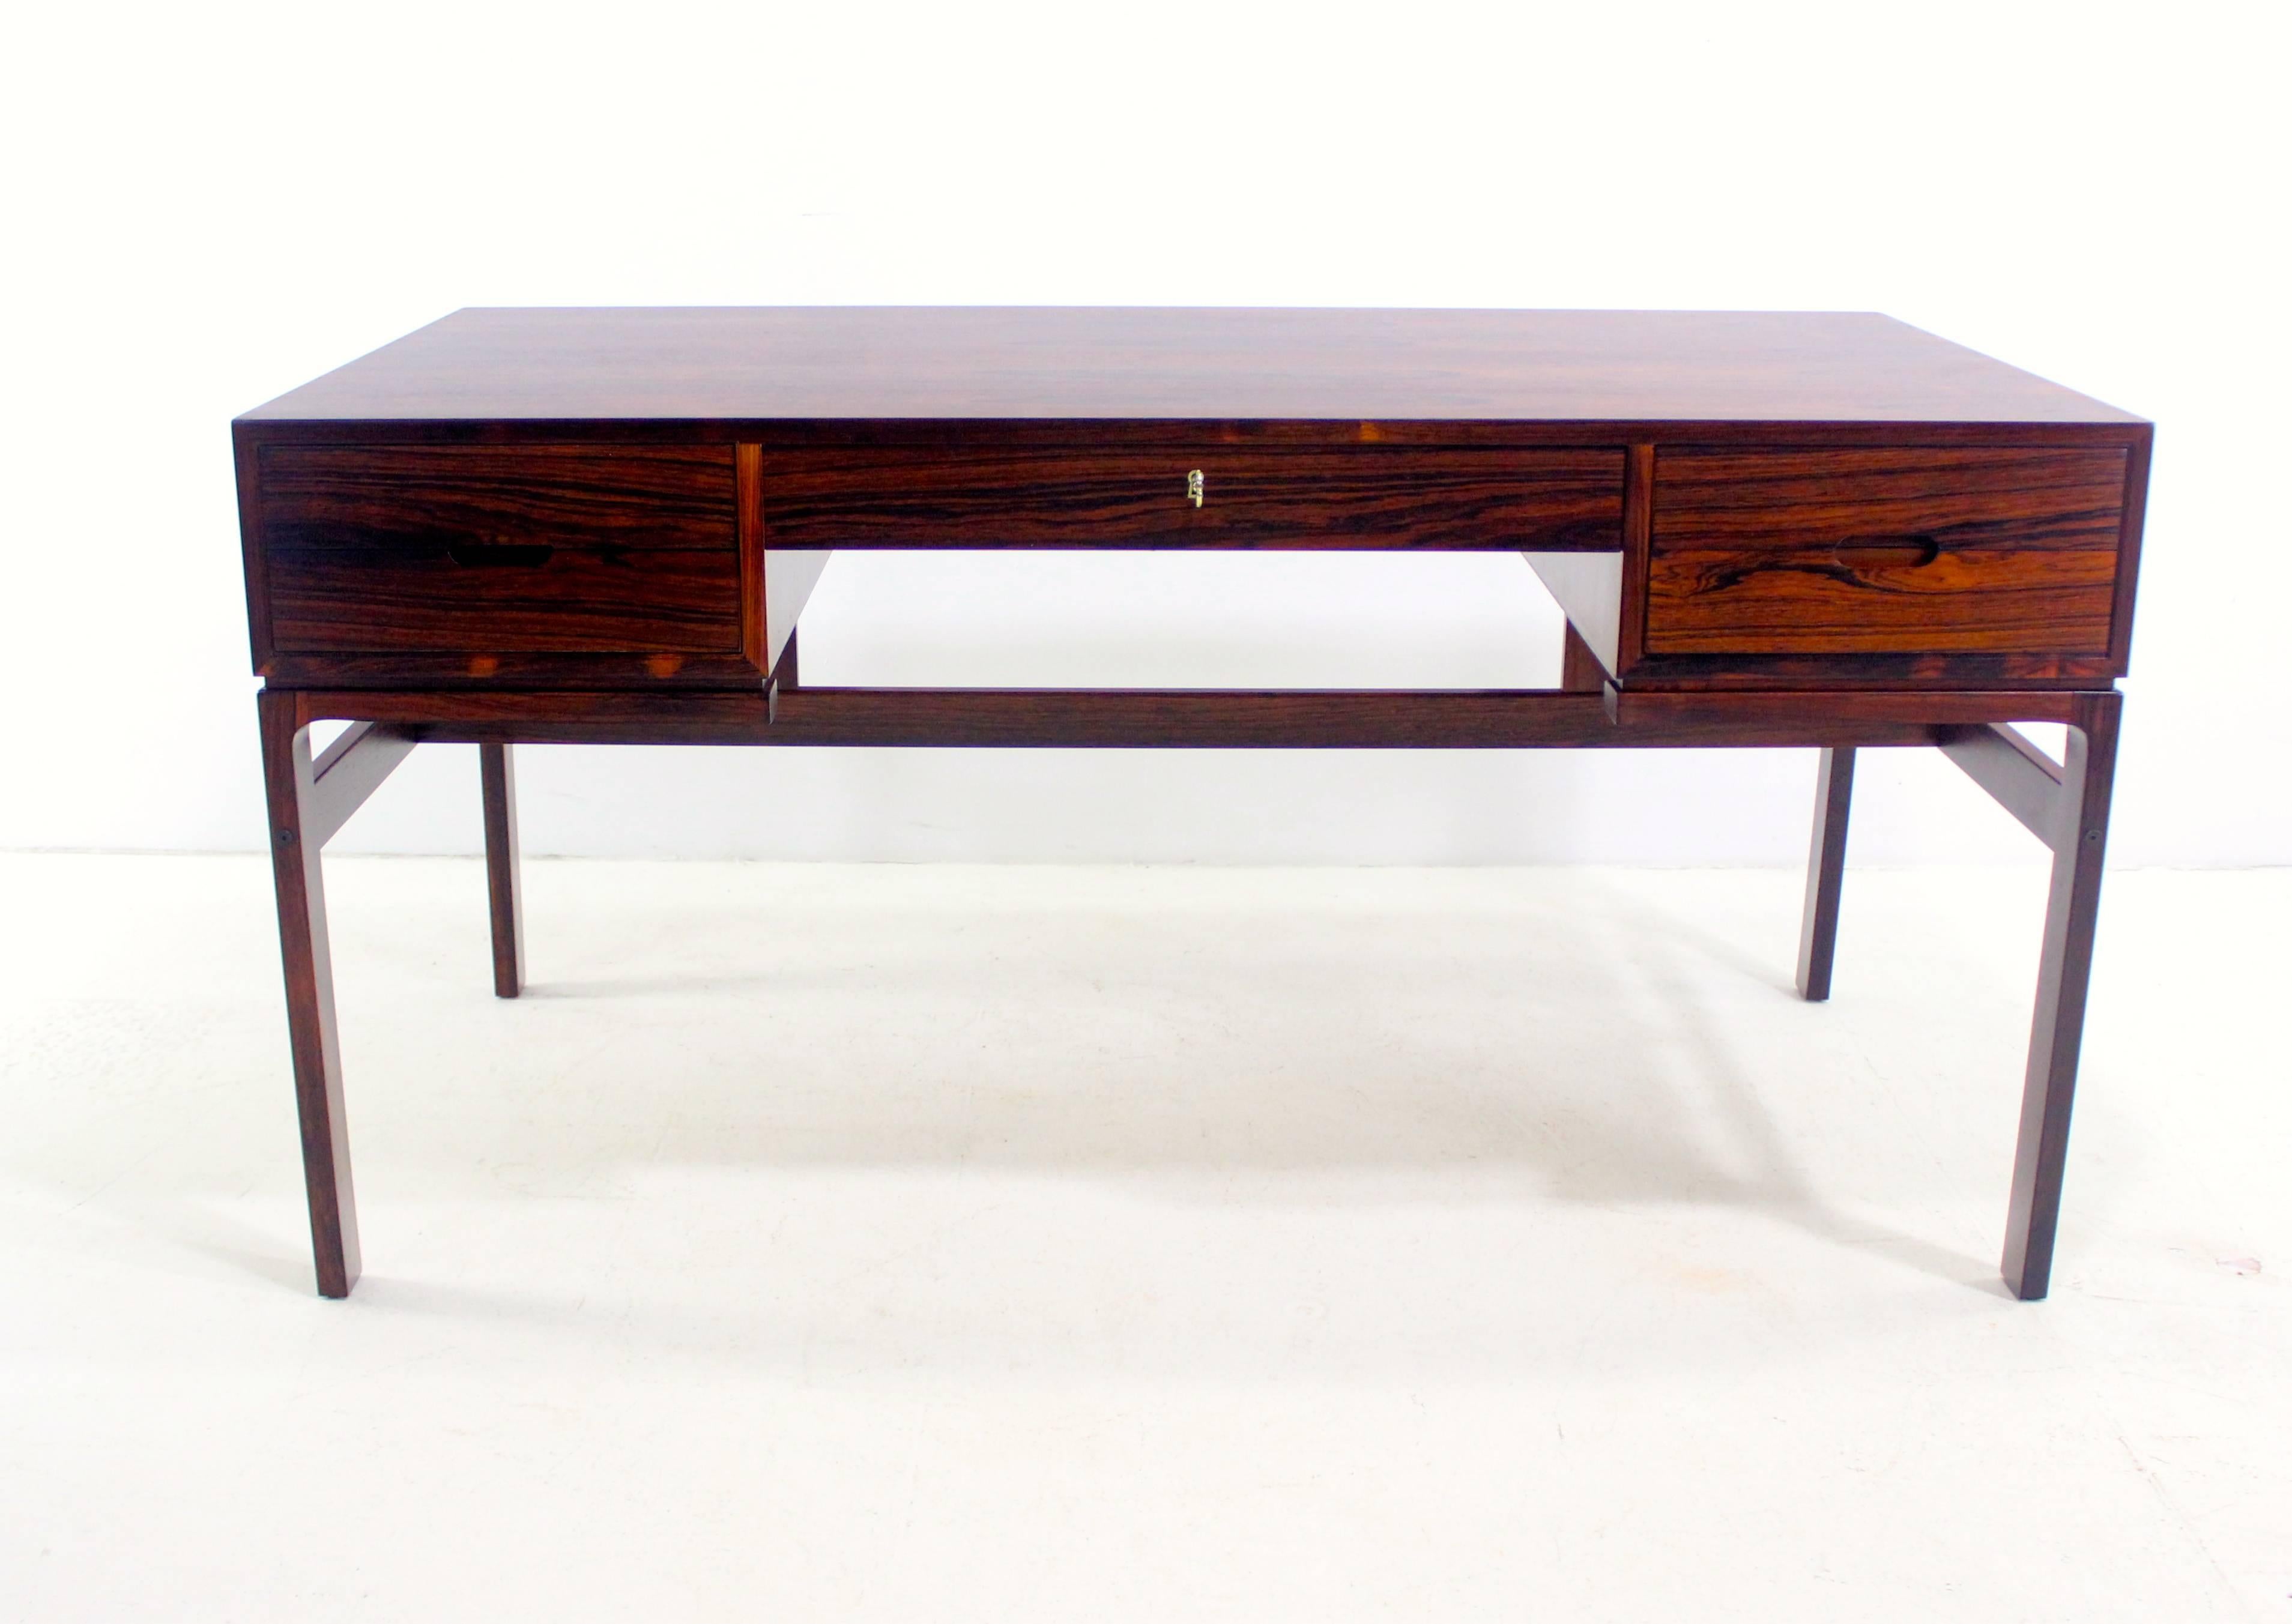 Danish modern desk designed by Arne Wahl Iversen.
Vinde Mobelfabrik, maker.
Richly grained rosewood.
Two drawers on each side. Removable pencil tray in top left drawer.
One locking drawer on middle - key included.
Front side has two cubby